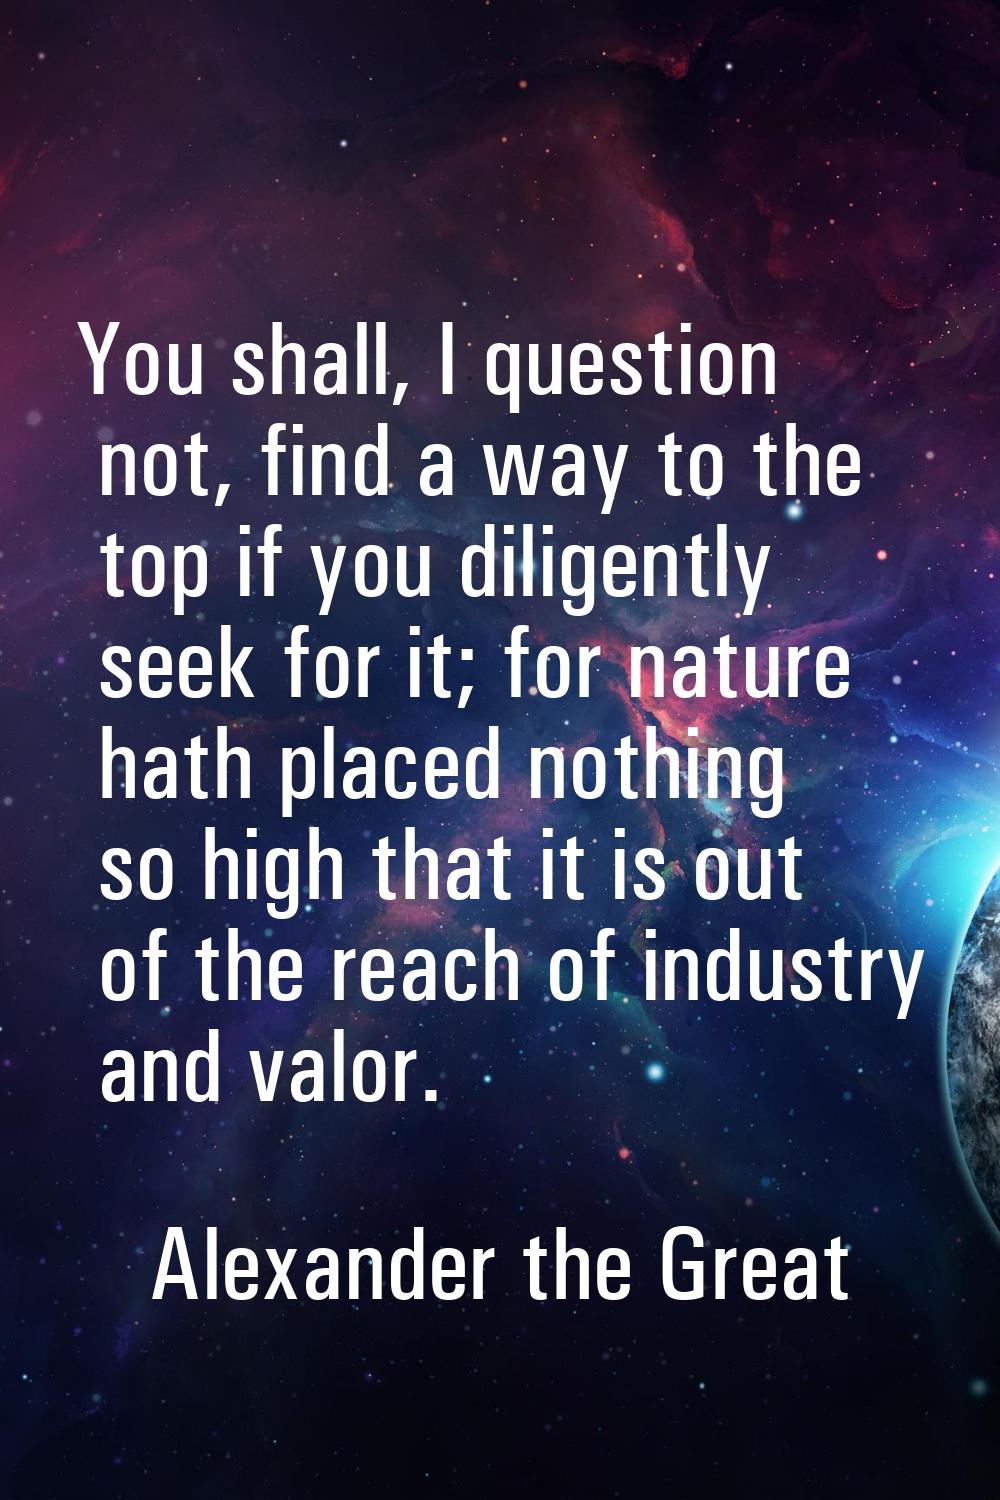 You shall, I question not, find a way to the top if you diligently seek for it; for nature hath pla